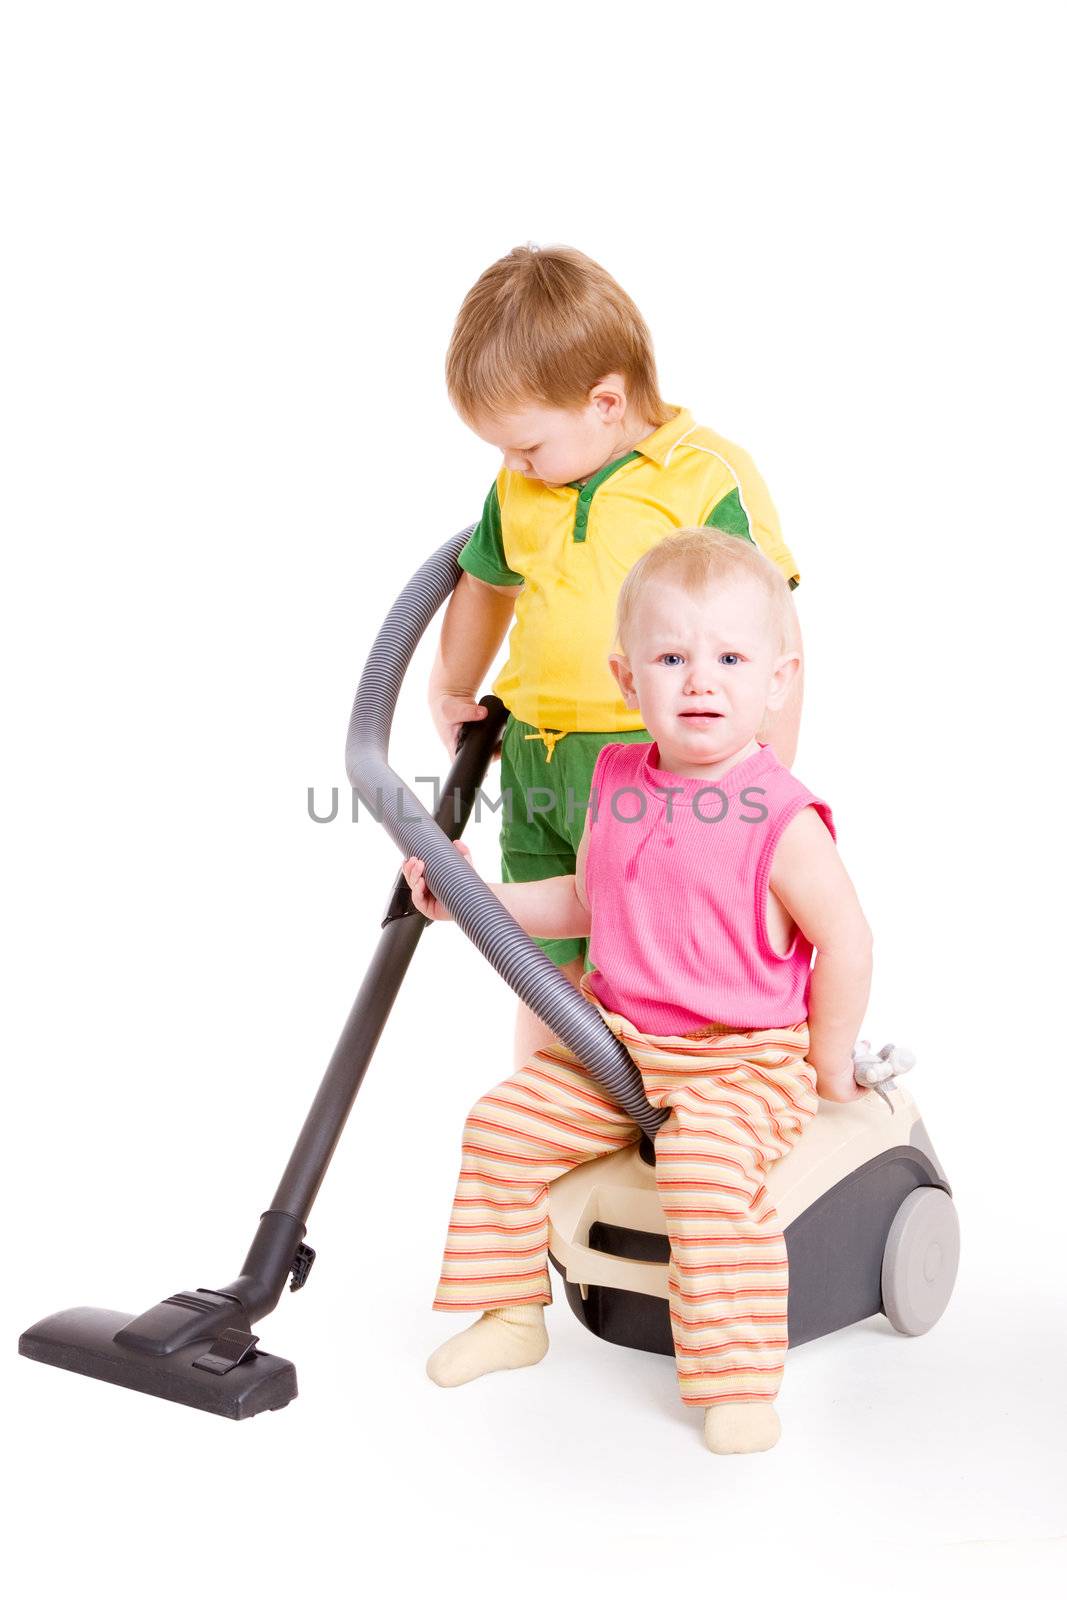 a small girl and a small boy by the Vacuum cleaner by vsurkov